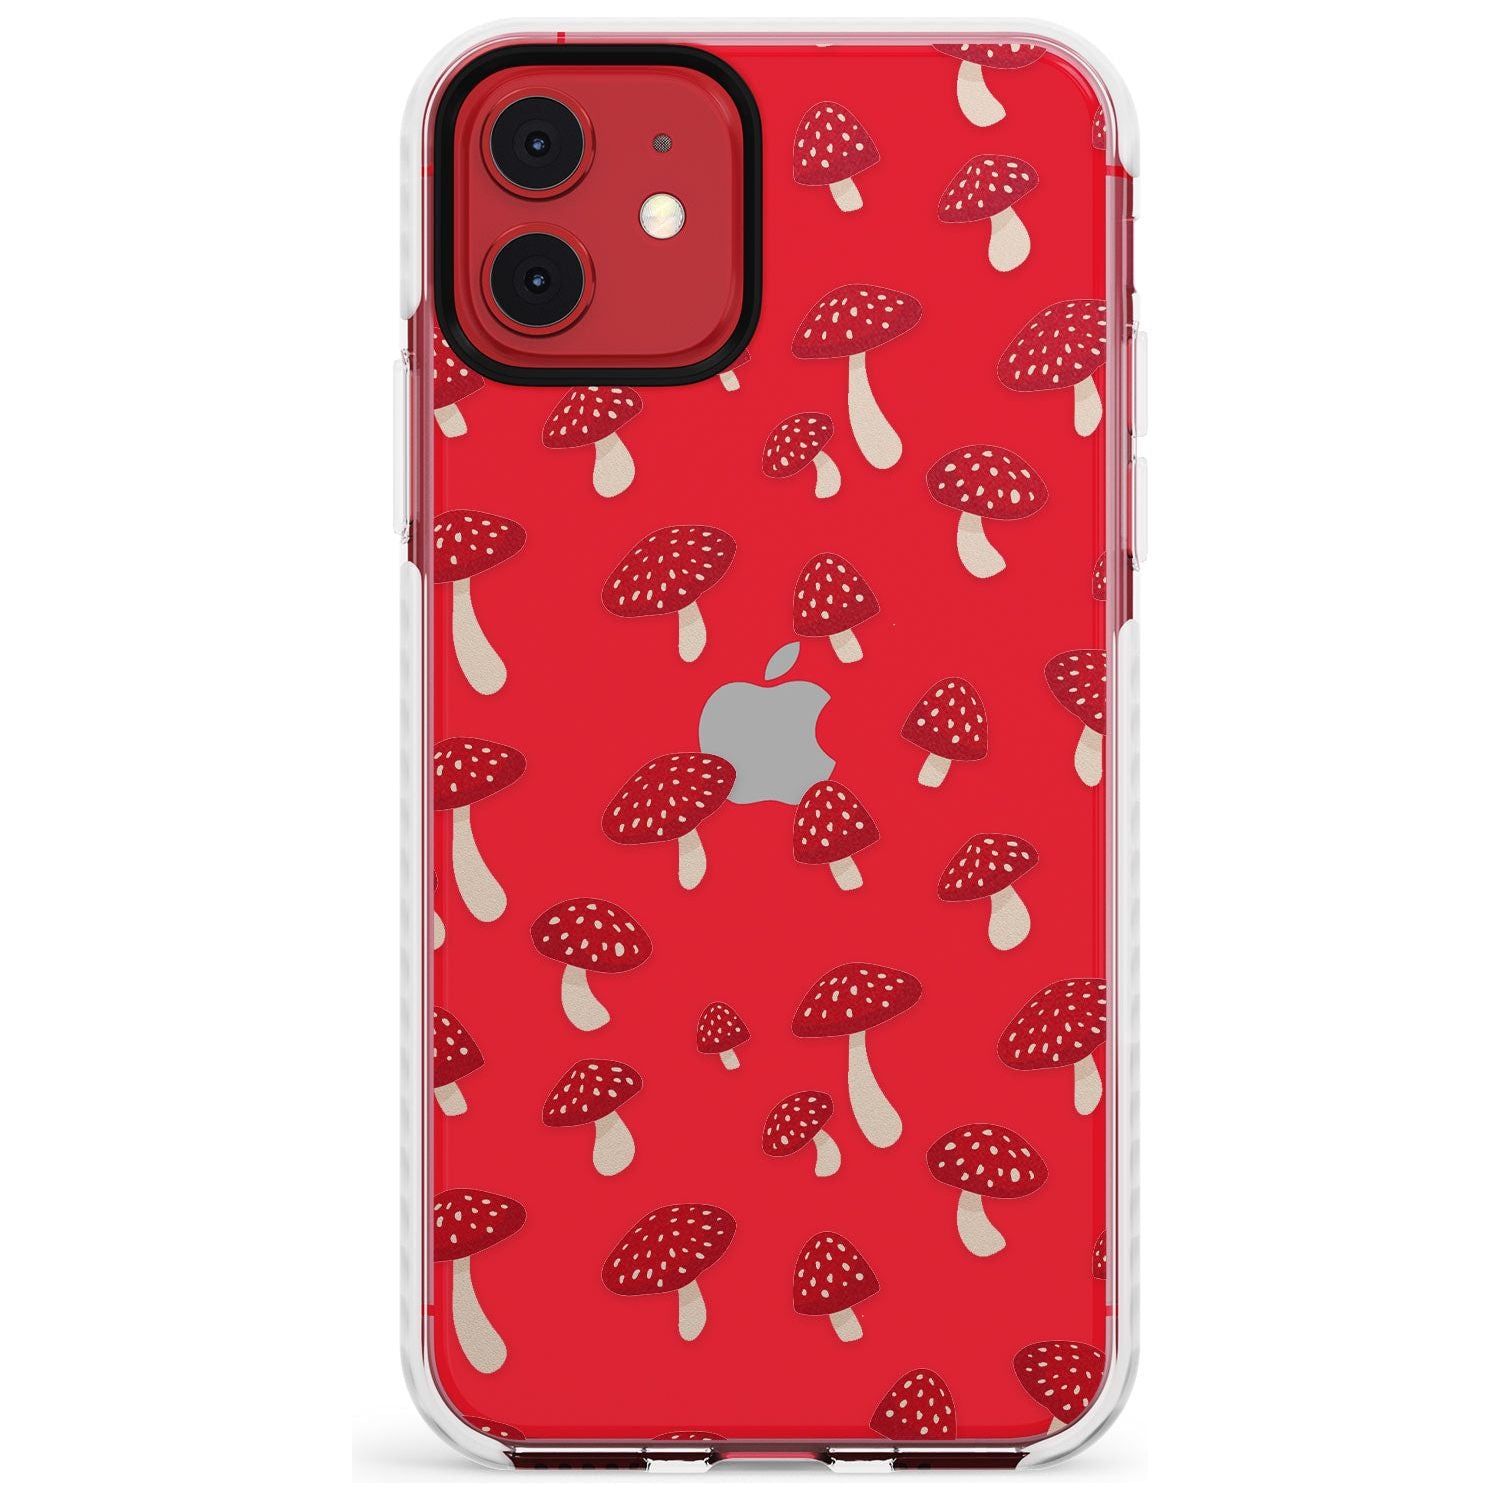 Magical Mushrooms Pattern Impact Phone Case for iPhone 11